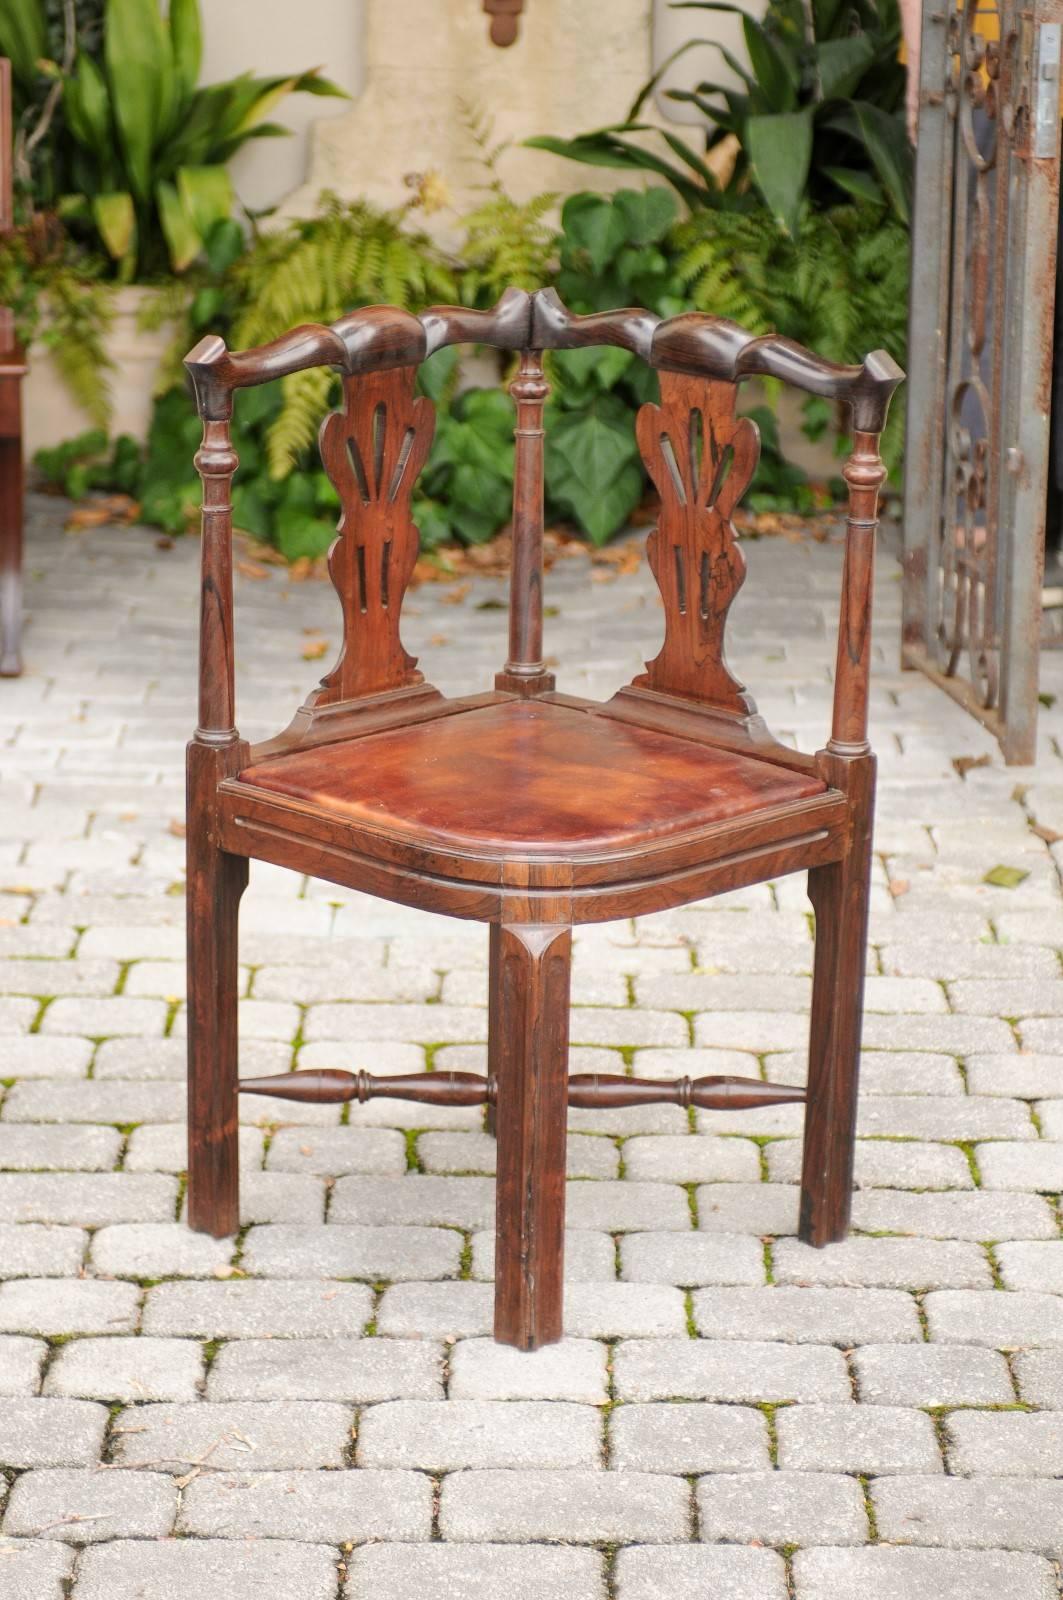 An English carved wood corner chair with leather seat from the mid-19th century. This English corner chair features a carved back with two pierced splats and supported by three thin columns. The warm brown leather seat is raised on four straight